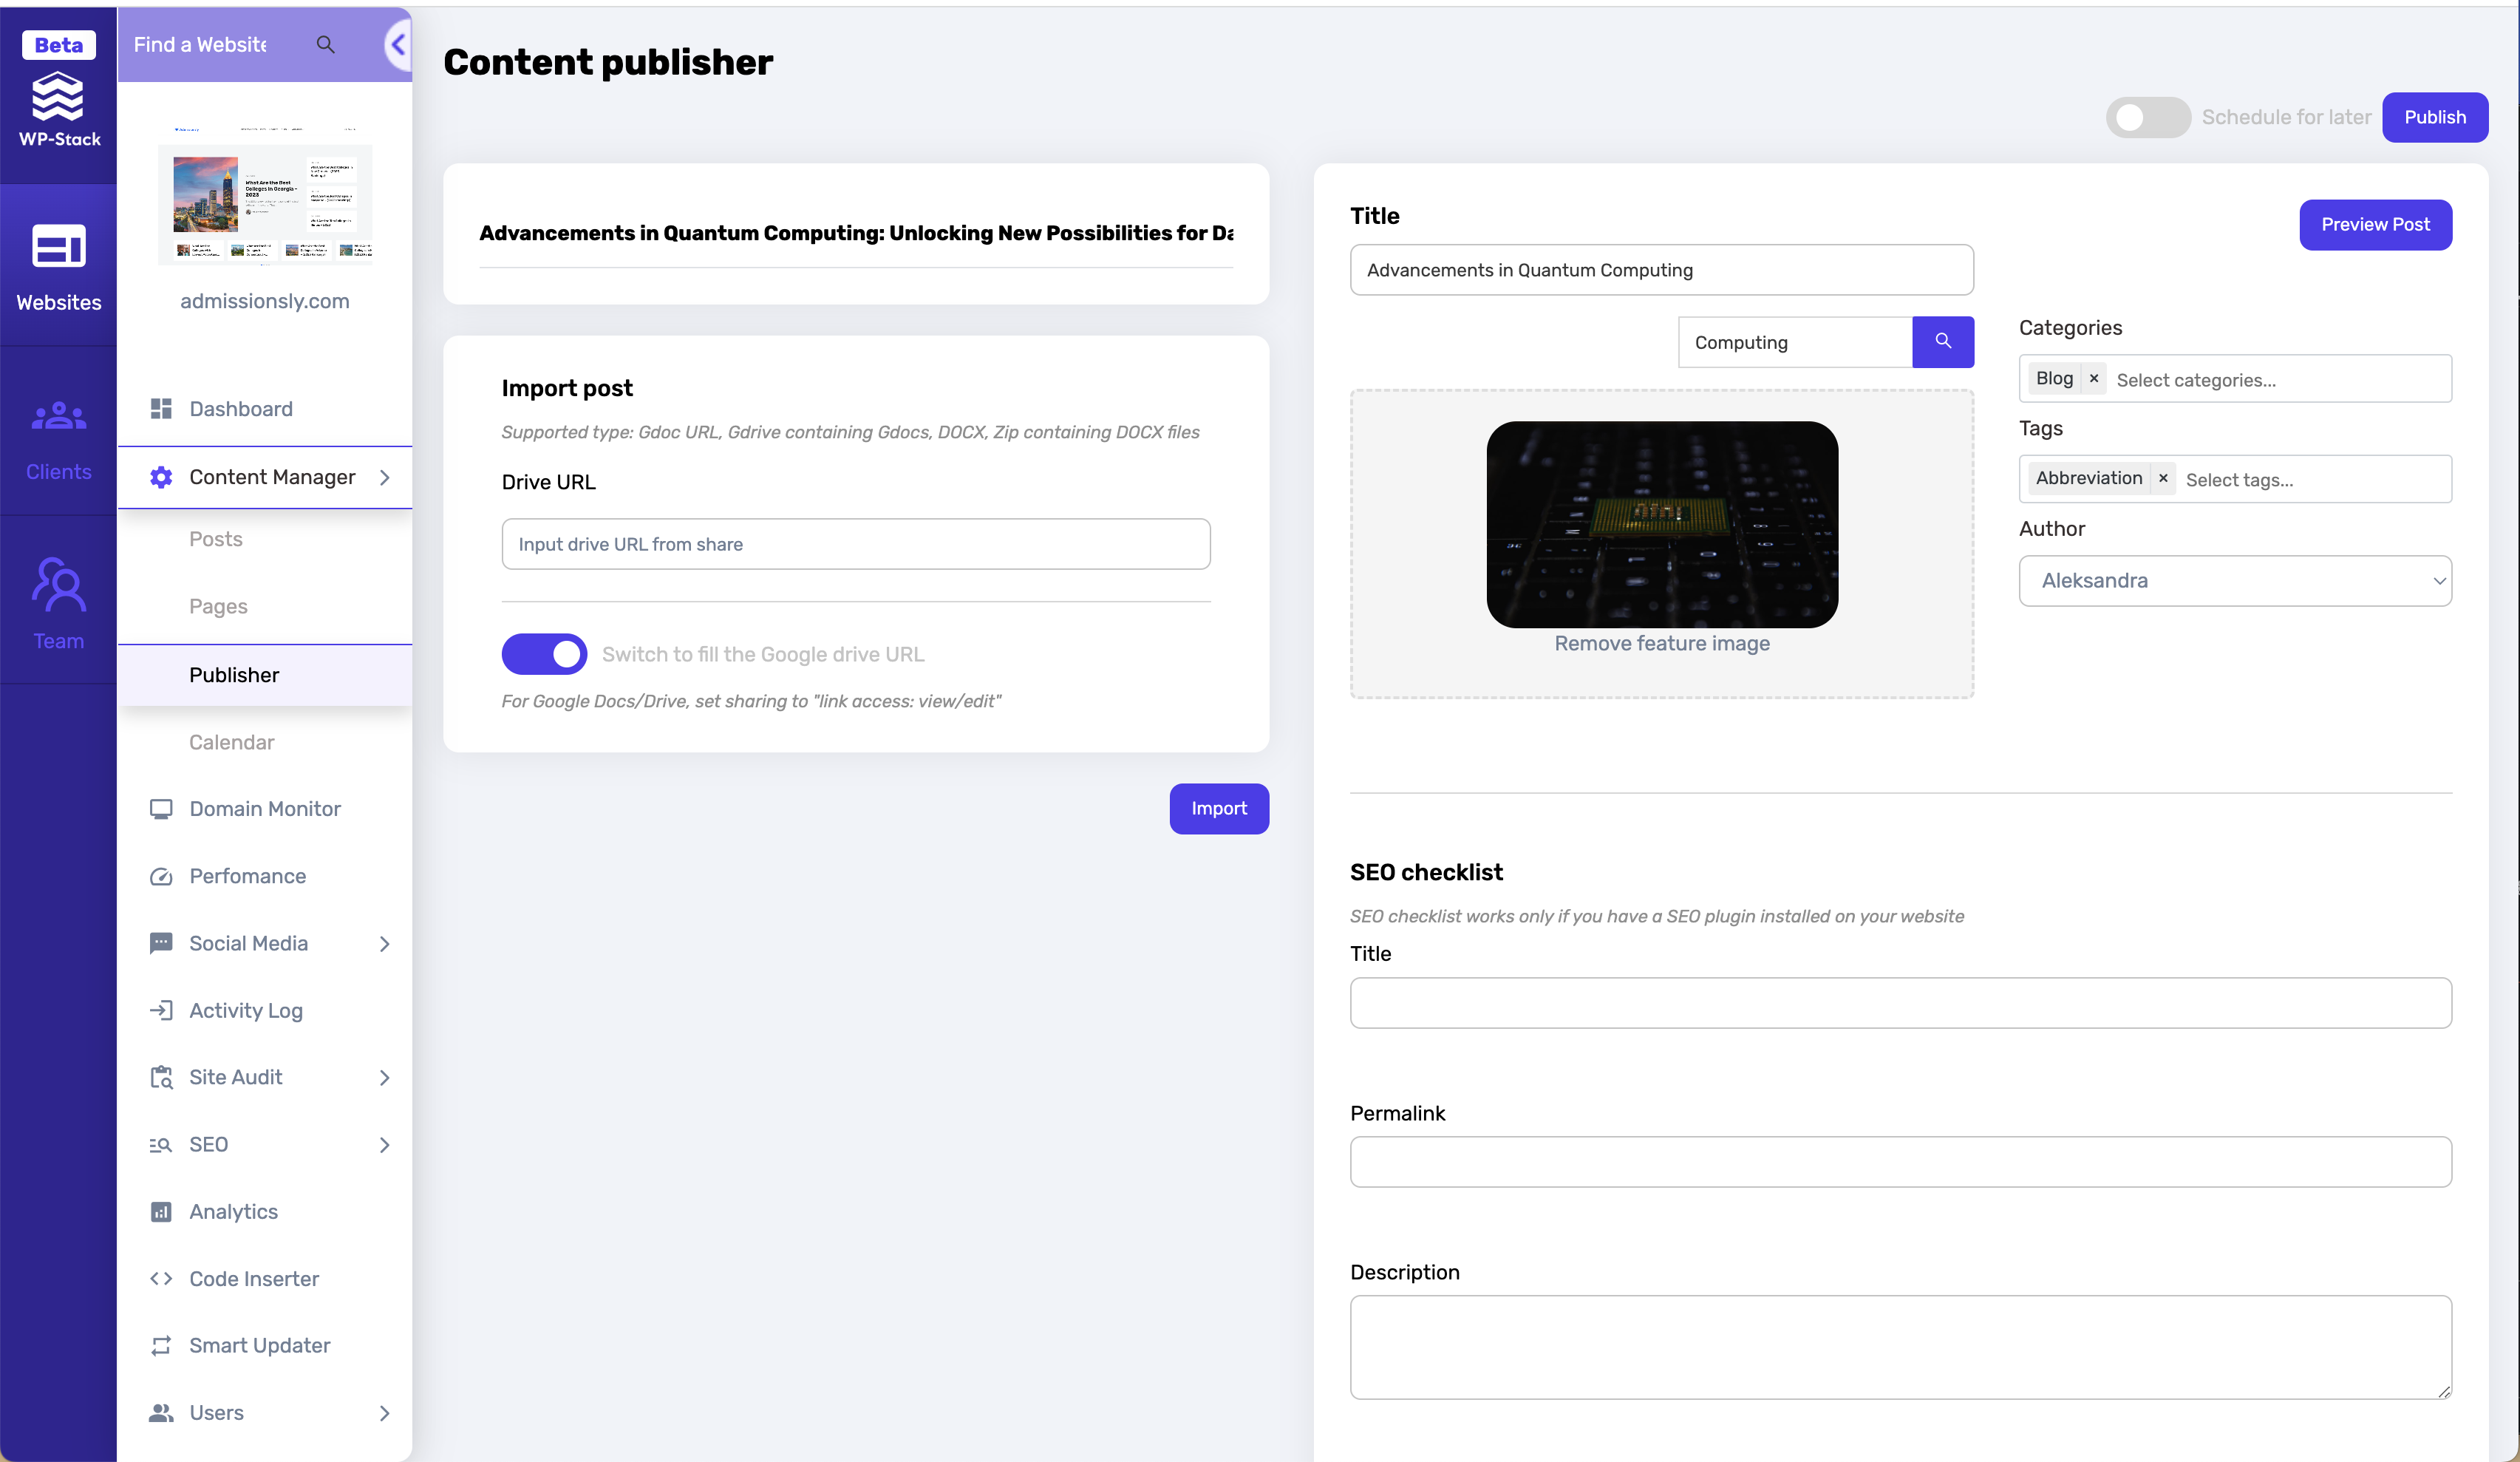 WP-Stack | Content Publisher